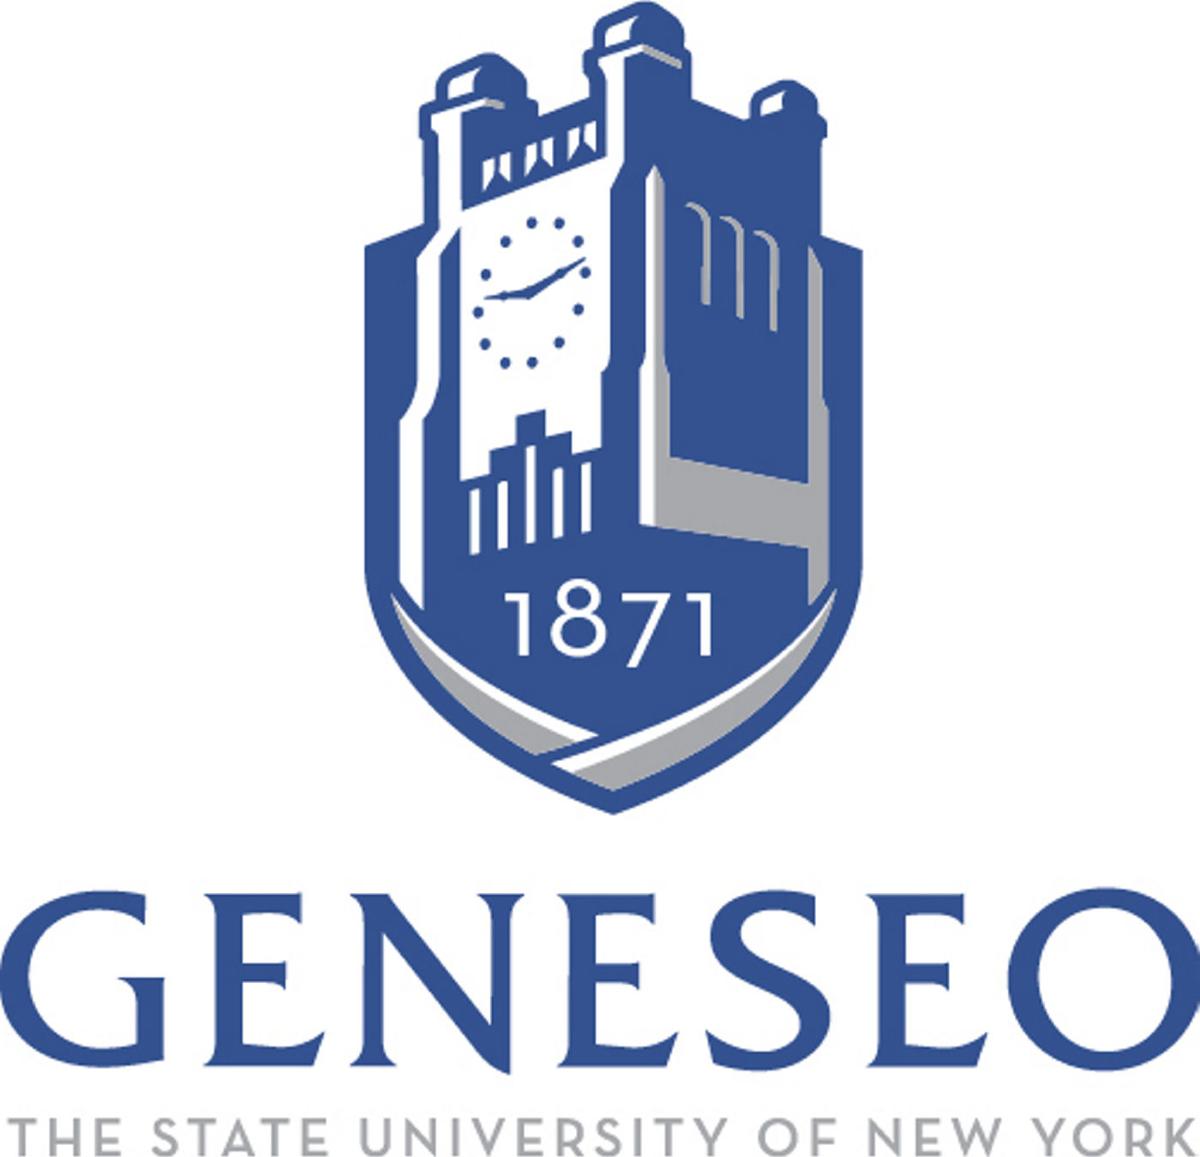 WATCH: SUNY Geneseo introduces new logo | Local News | thelcn.com